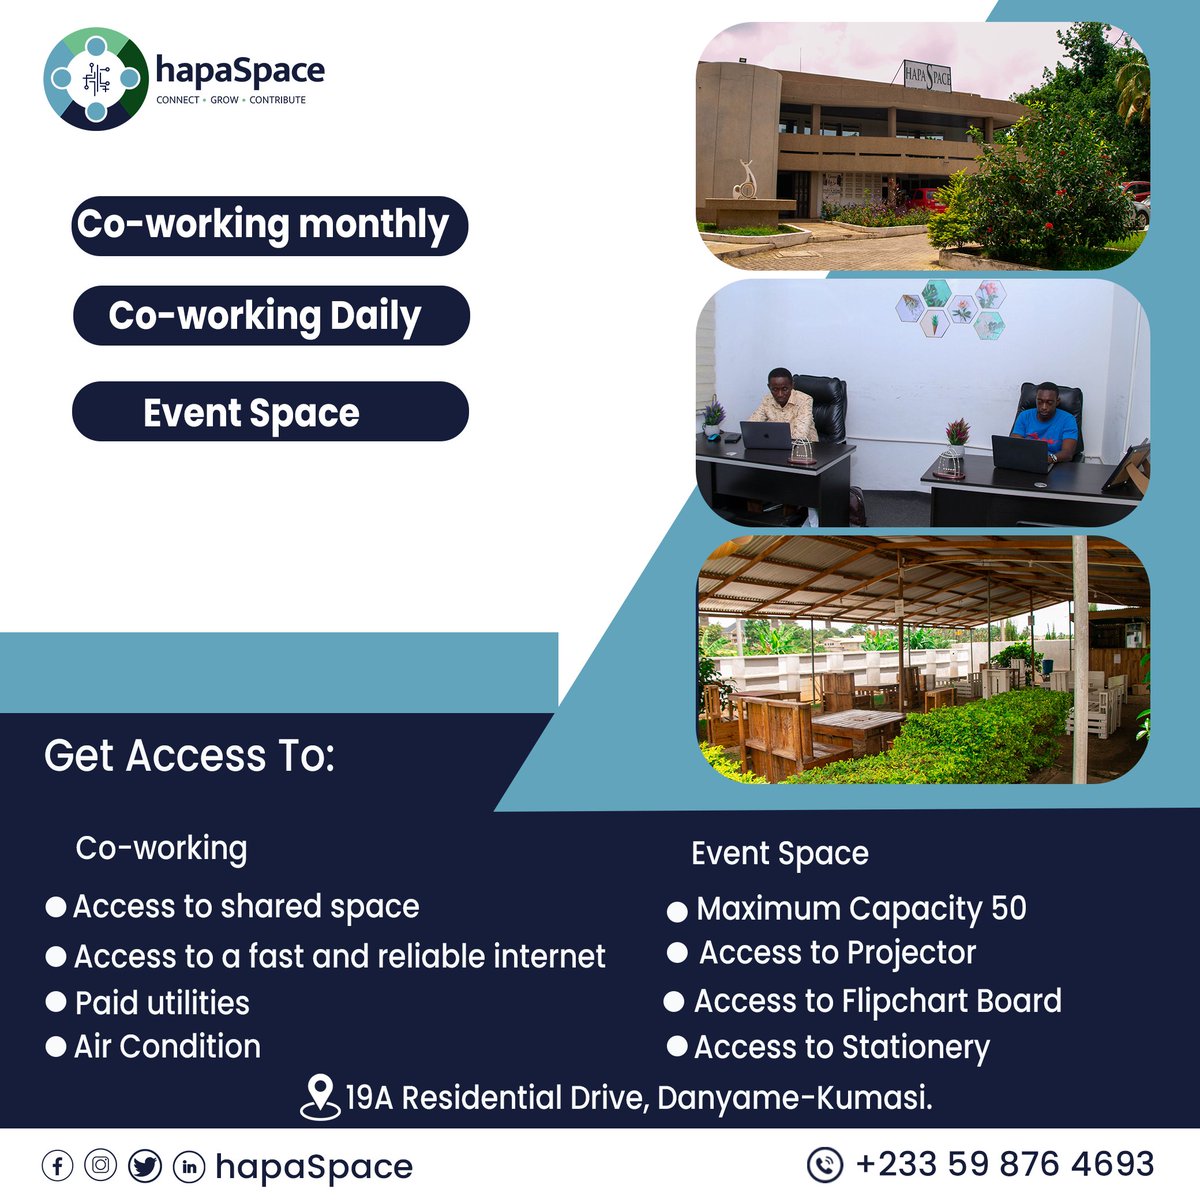 Looking for a #workspace and event venue? Look no further than #hapaSpace! 
#hapaSpace
#coWorking
#eventVenue
#inHouseChef
#workspace
#entrepreneur
#creative
#networking
#flexibleSpace
#officeSpace
#teamBuilding
#businessEvents
#corporateMeeting